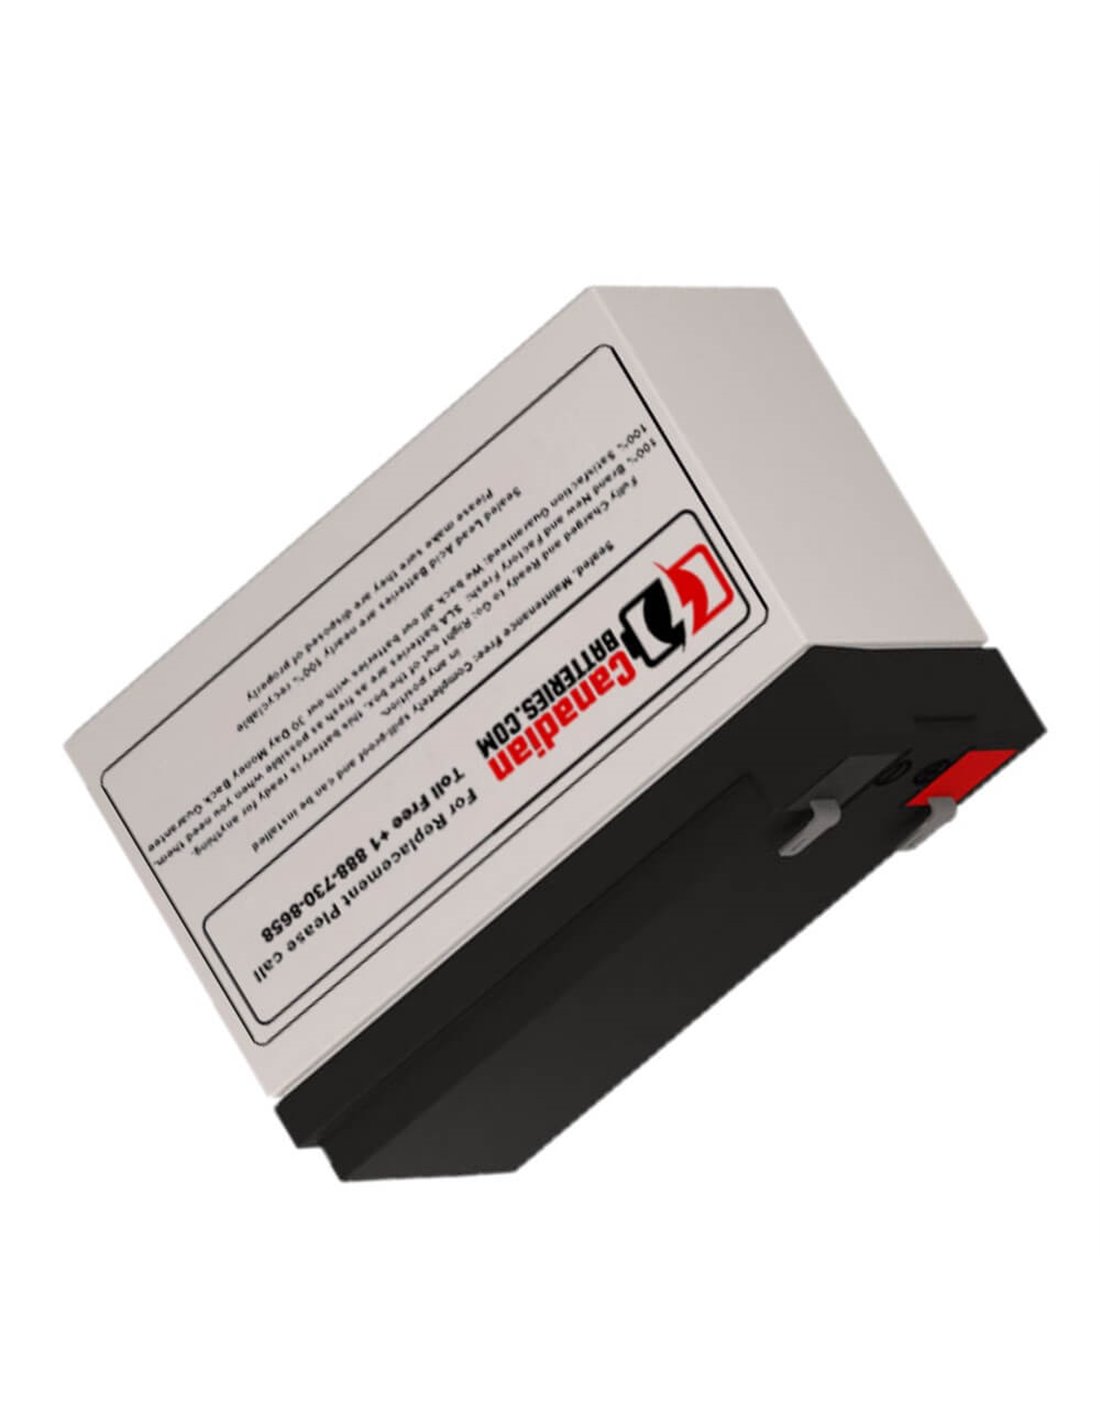 Battery for CyberPower Cps180phv UPS, 1 x 12V, 7Ah - 84Wh